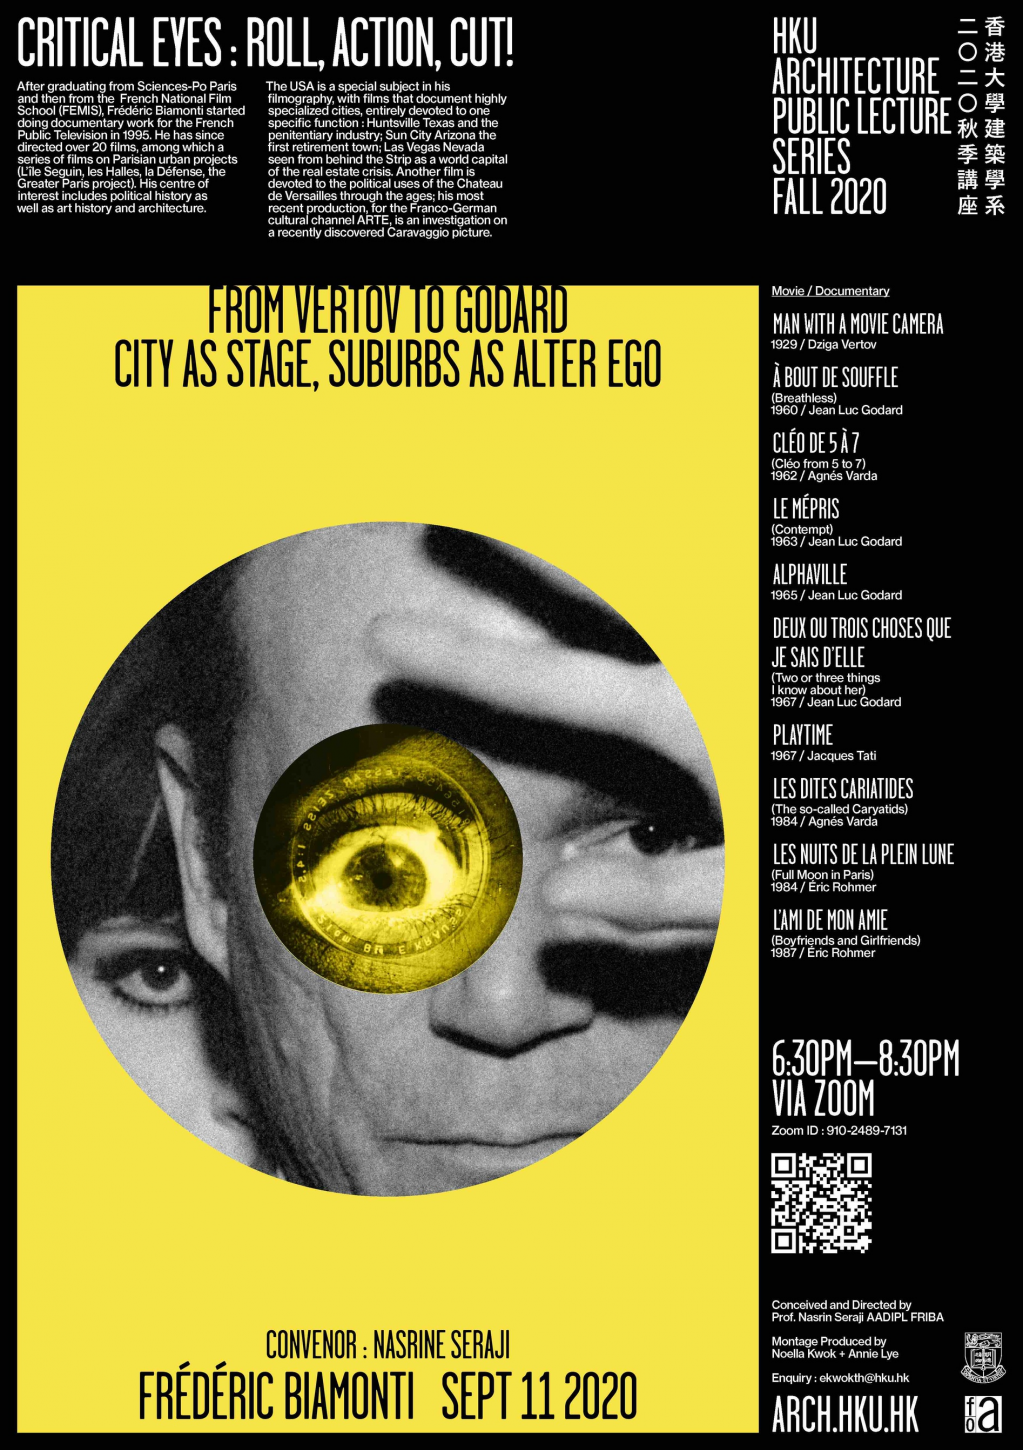 [HKU Department of Architecture] Critical Eyes: Roll, Action, Cut! - 'From Vertov to Godard - city as stage, suburbs as alter ego' by FrÃdÃr